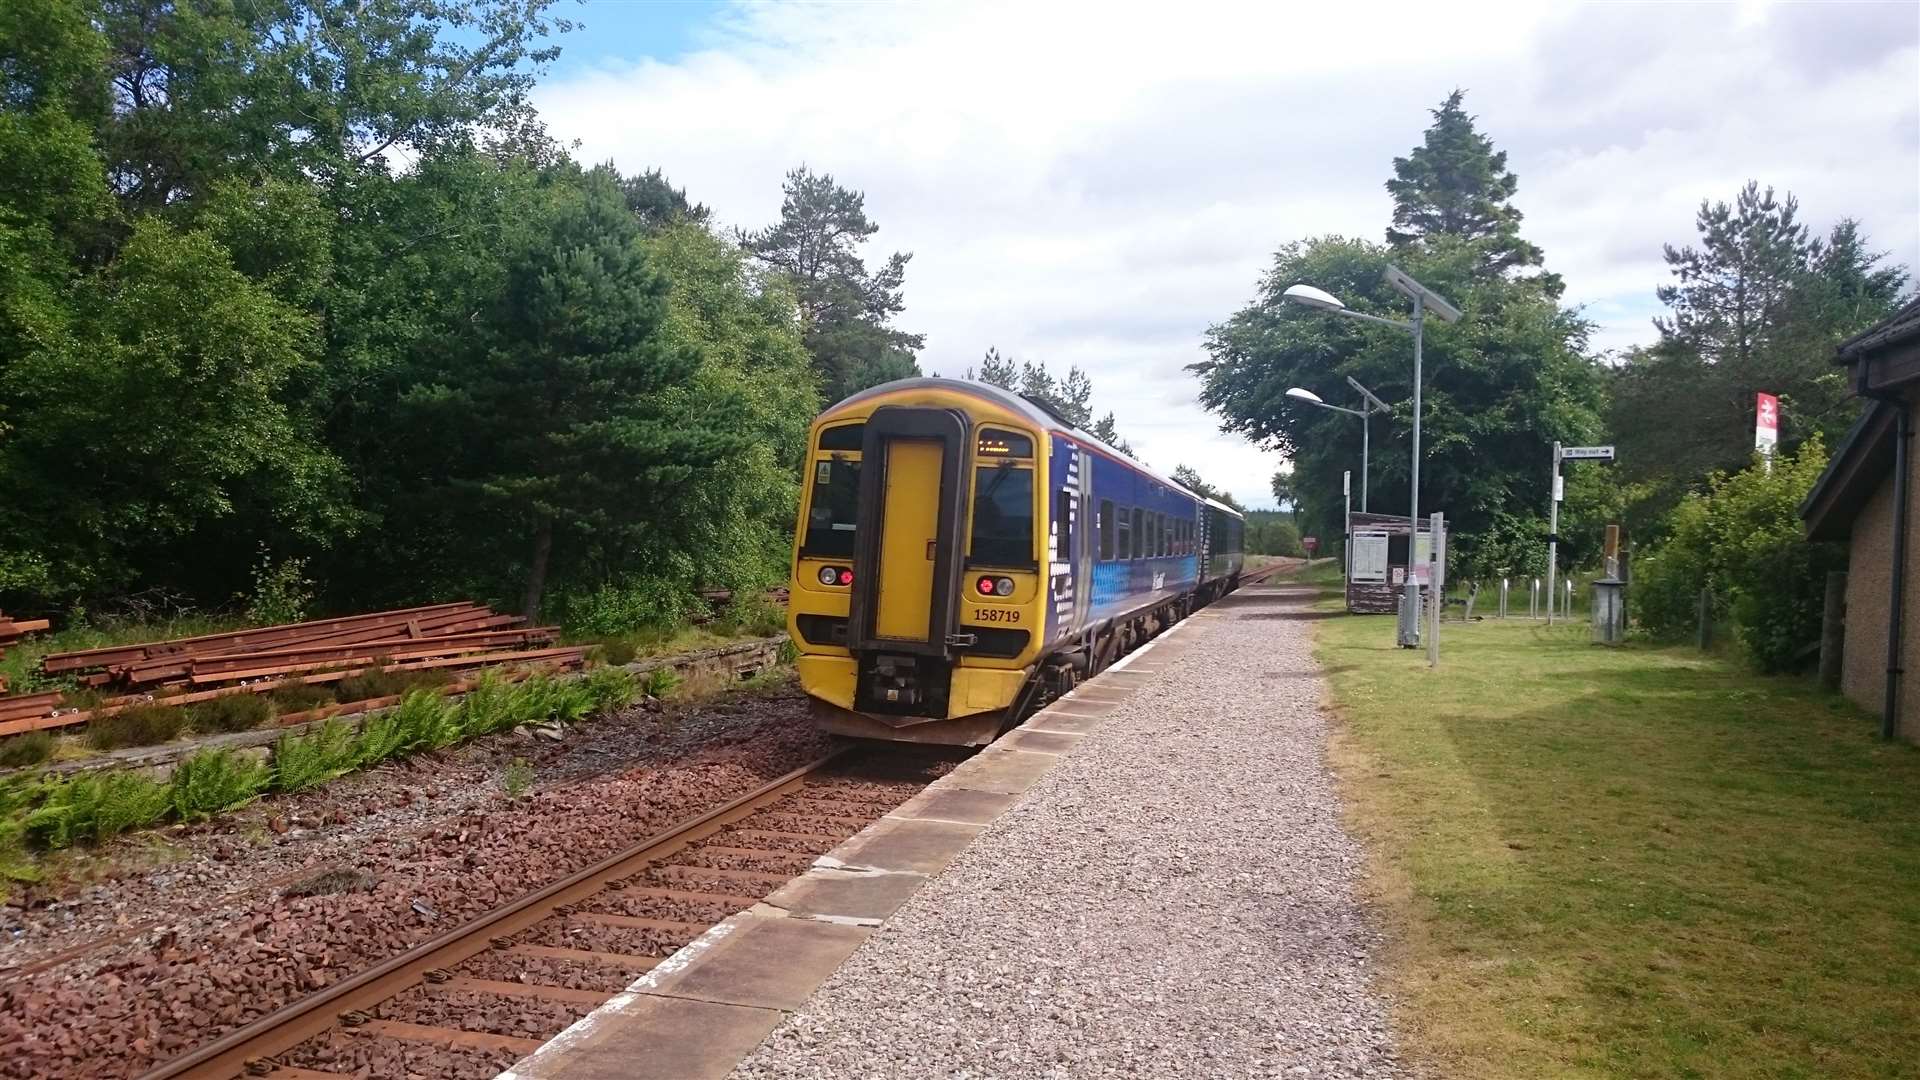 ScotRail has warned of disruption to services.